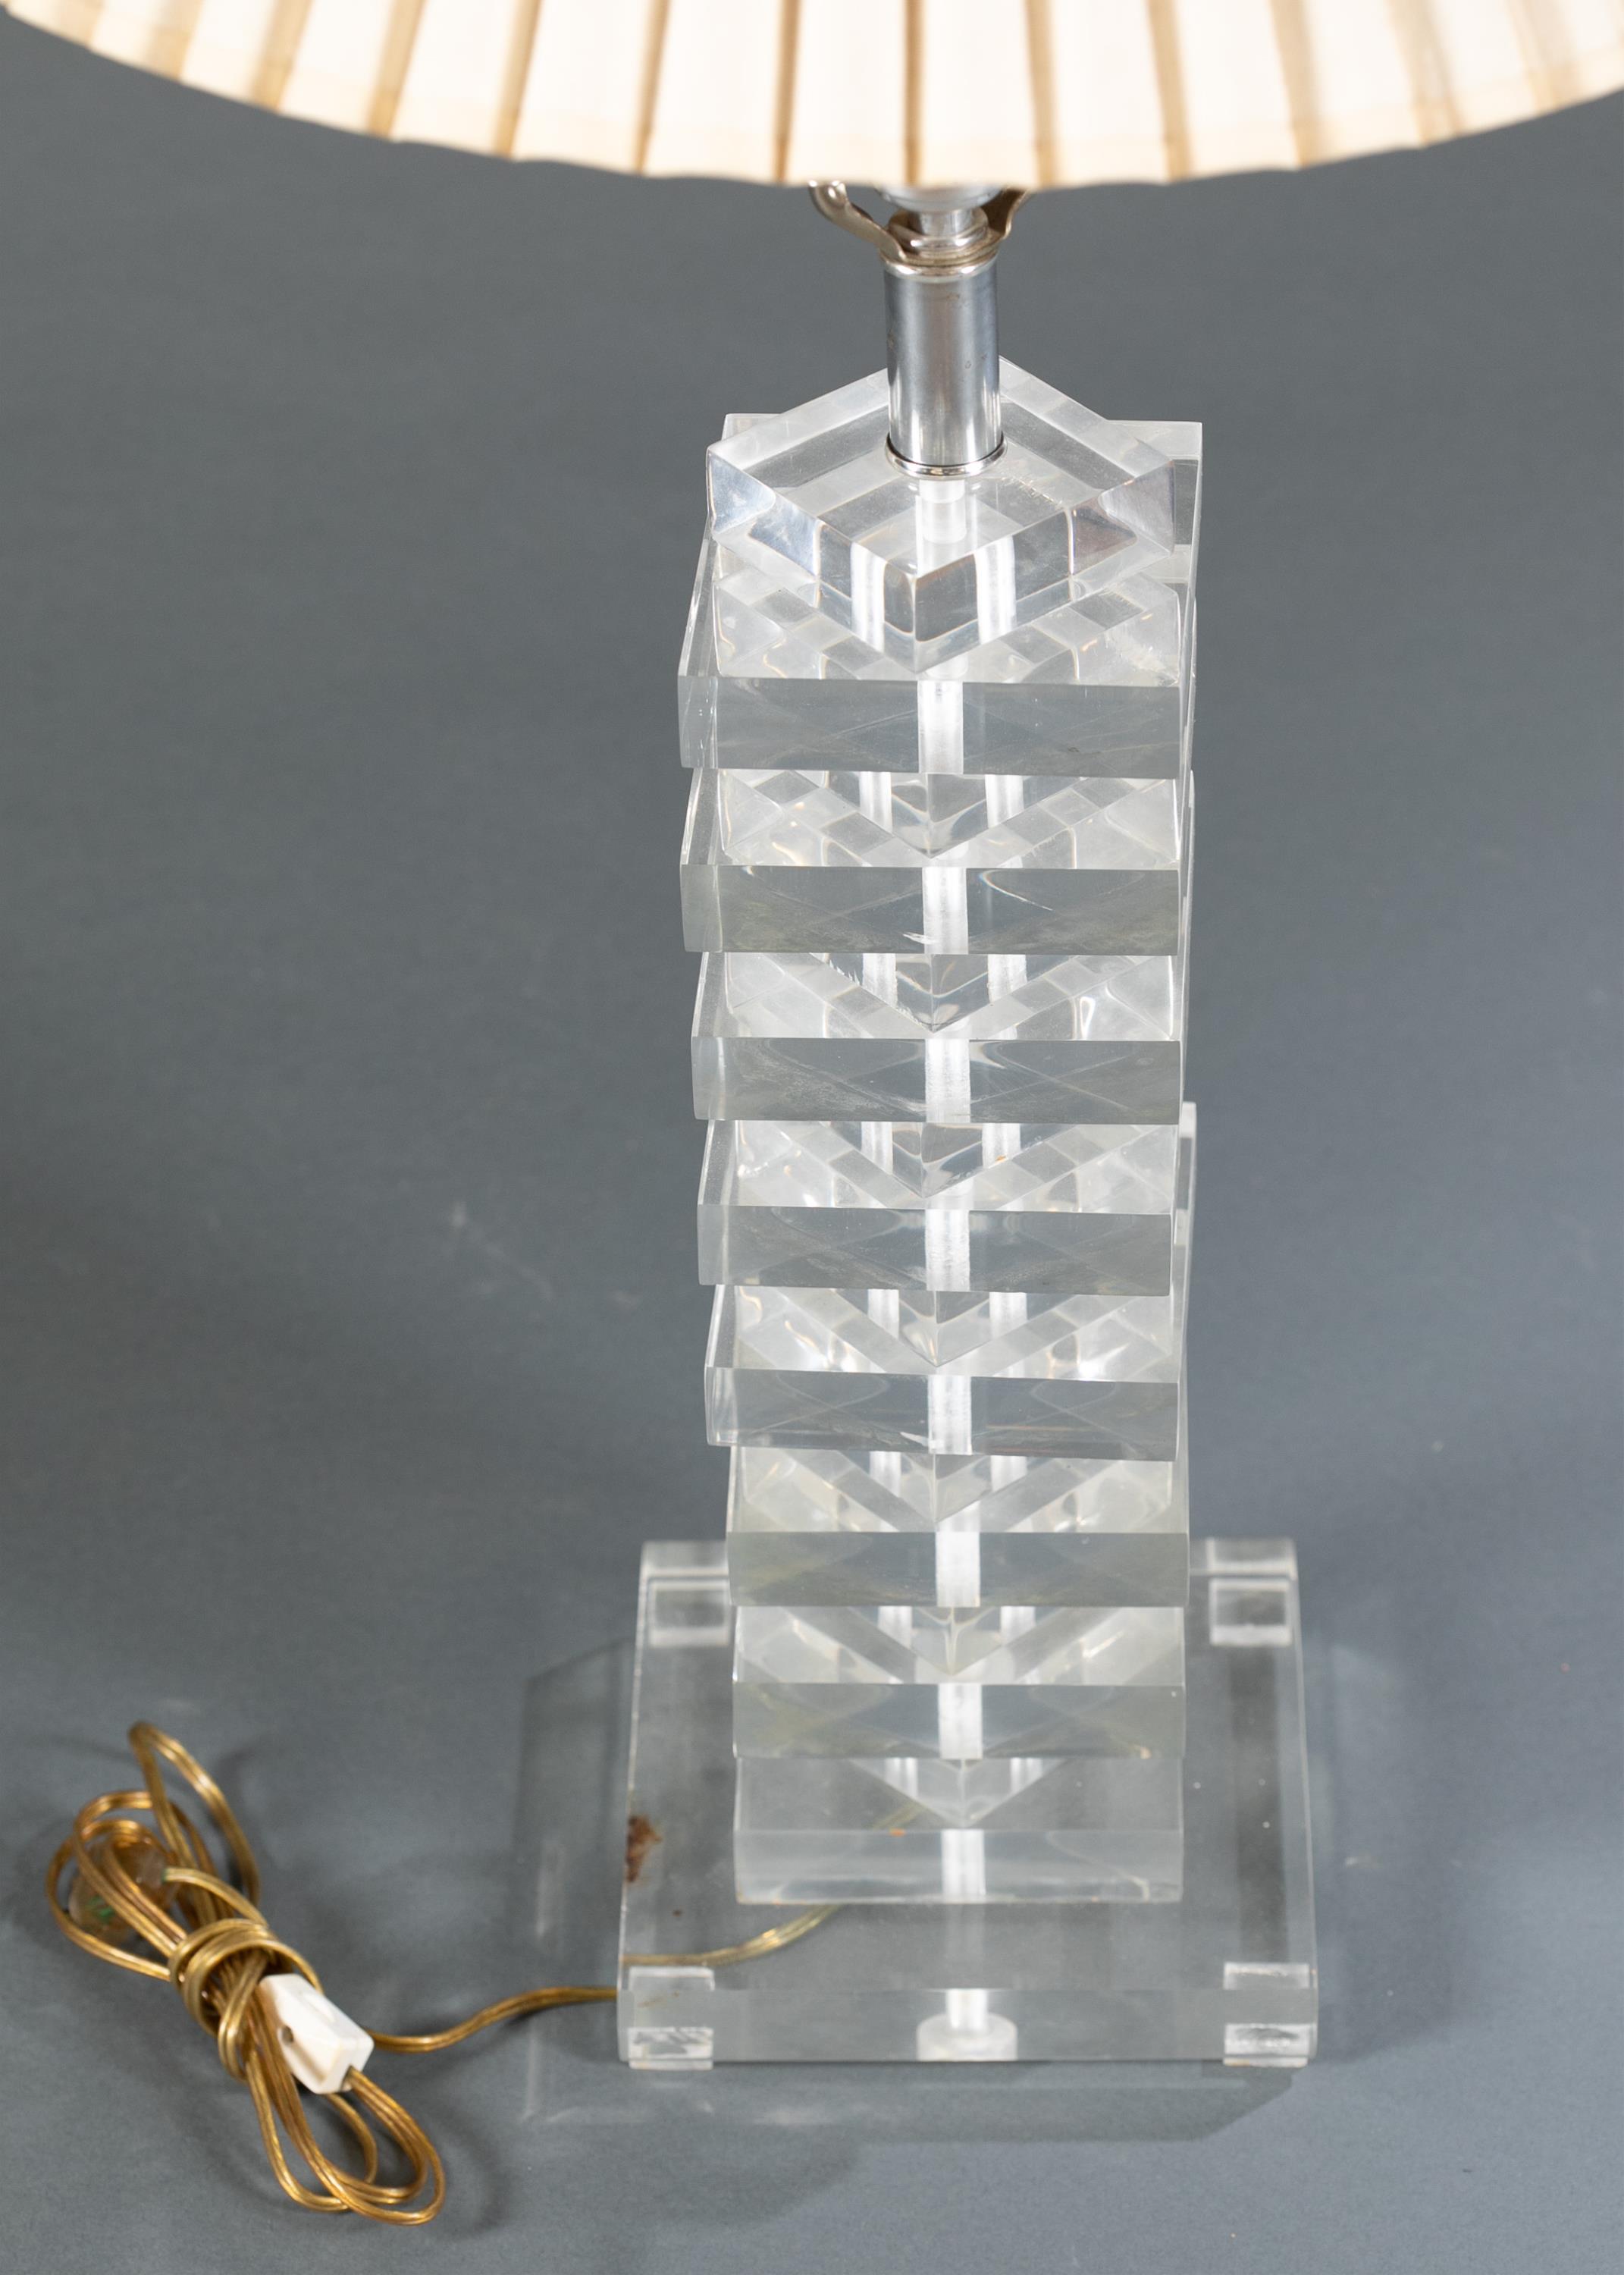 2 Hollywood Regency Bauer Lucite acrylic lamps. - Image 6 of 7